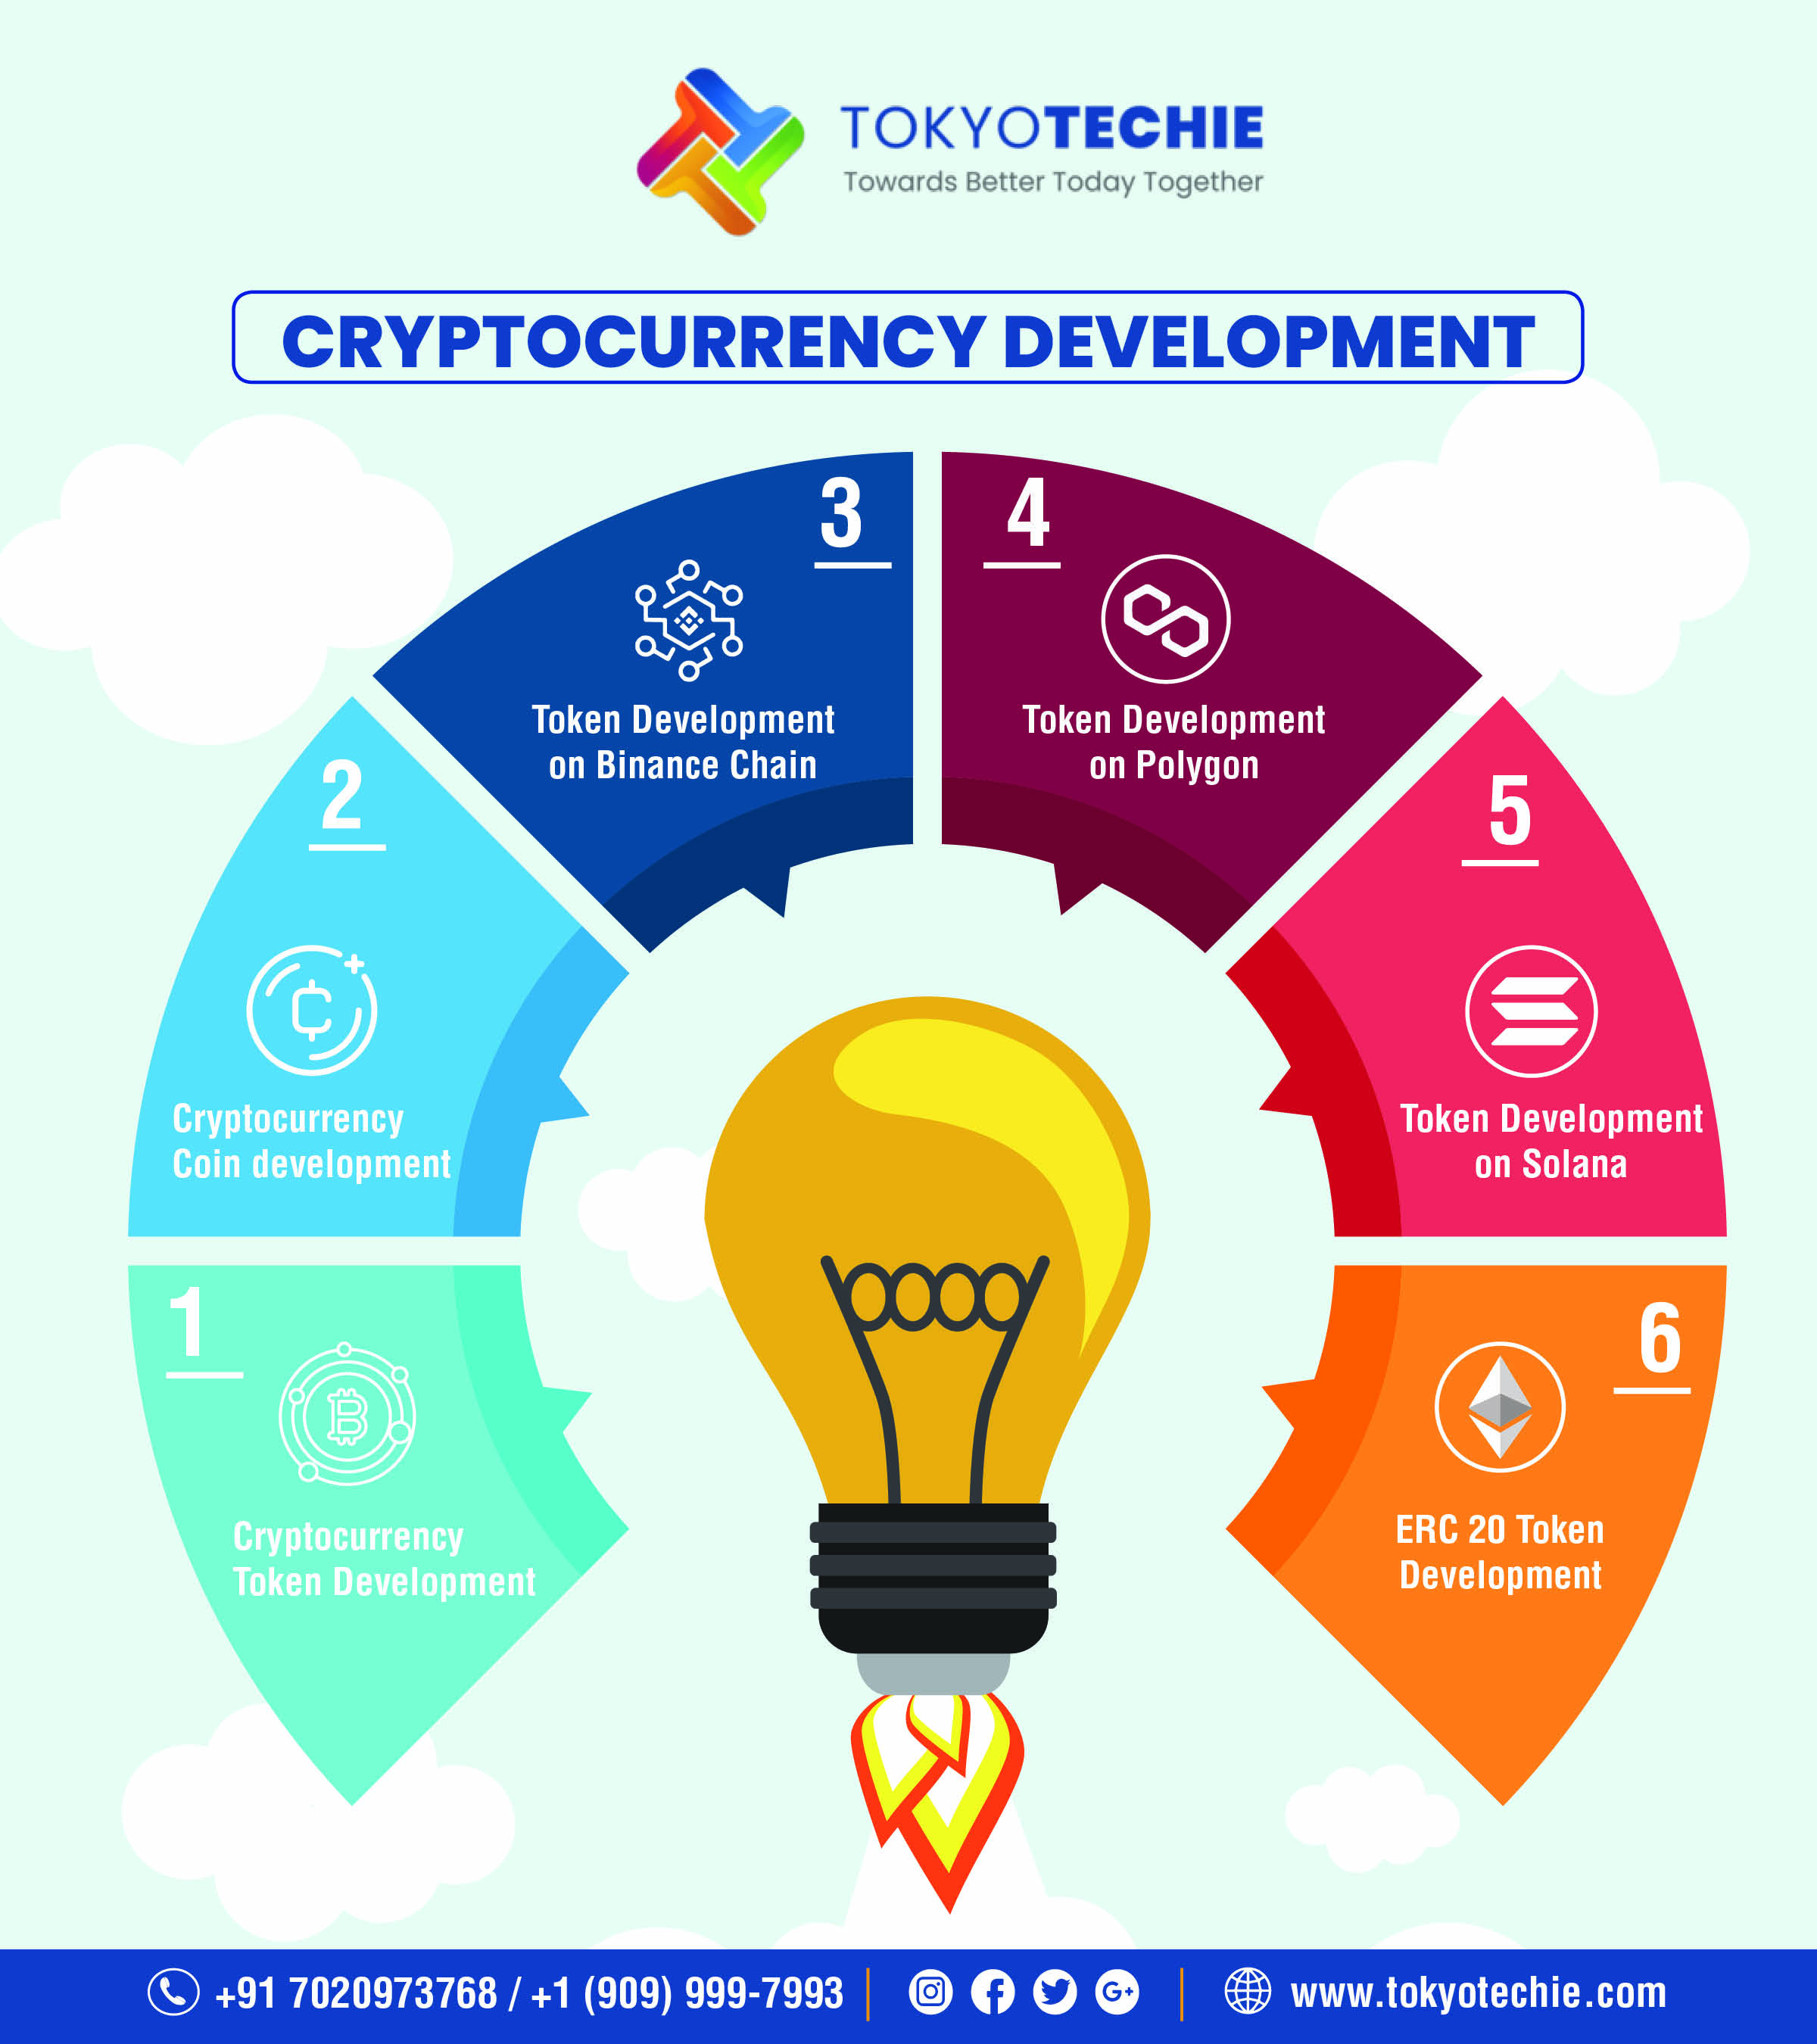 Towards Better Today Together

CRYPTOCURRENCY DEVELOPMENT

EN
Th

Token Development Token Development
on Binance Chain on Polygon

ry TOKYOTECHIE

 

 

9

SS

Token Development
on Solana

ERC 20 Token
Development

® +91 7020973768 / +1 (909) 999-7993 OO | © www.tokyotechie.com